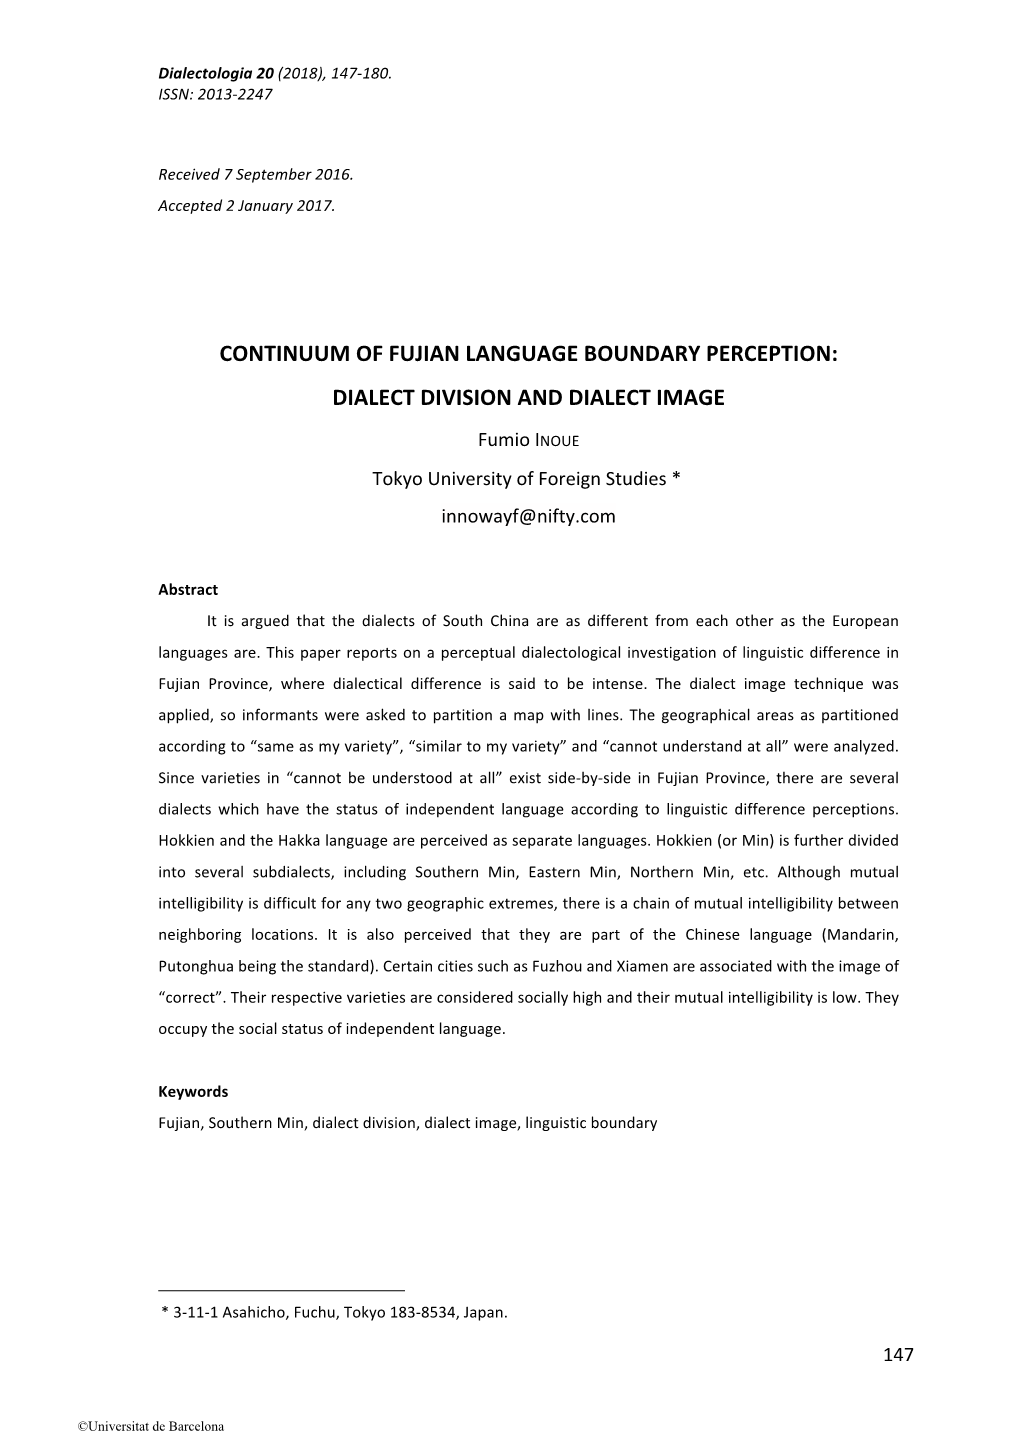 Continuum of Fujian Language Boundary Perception: Dialect Division and Dialect Image